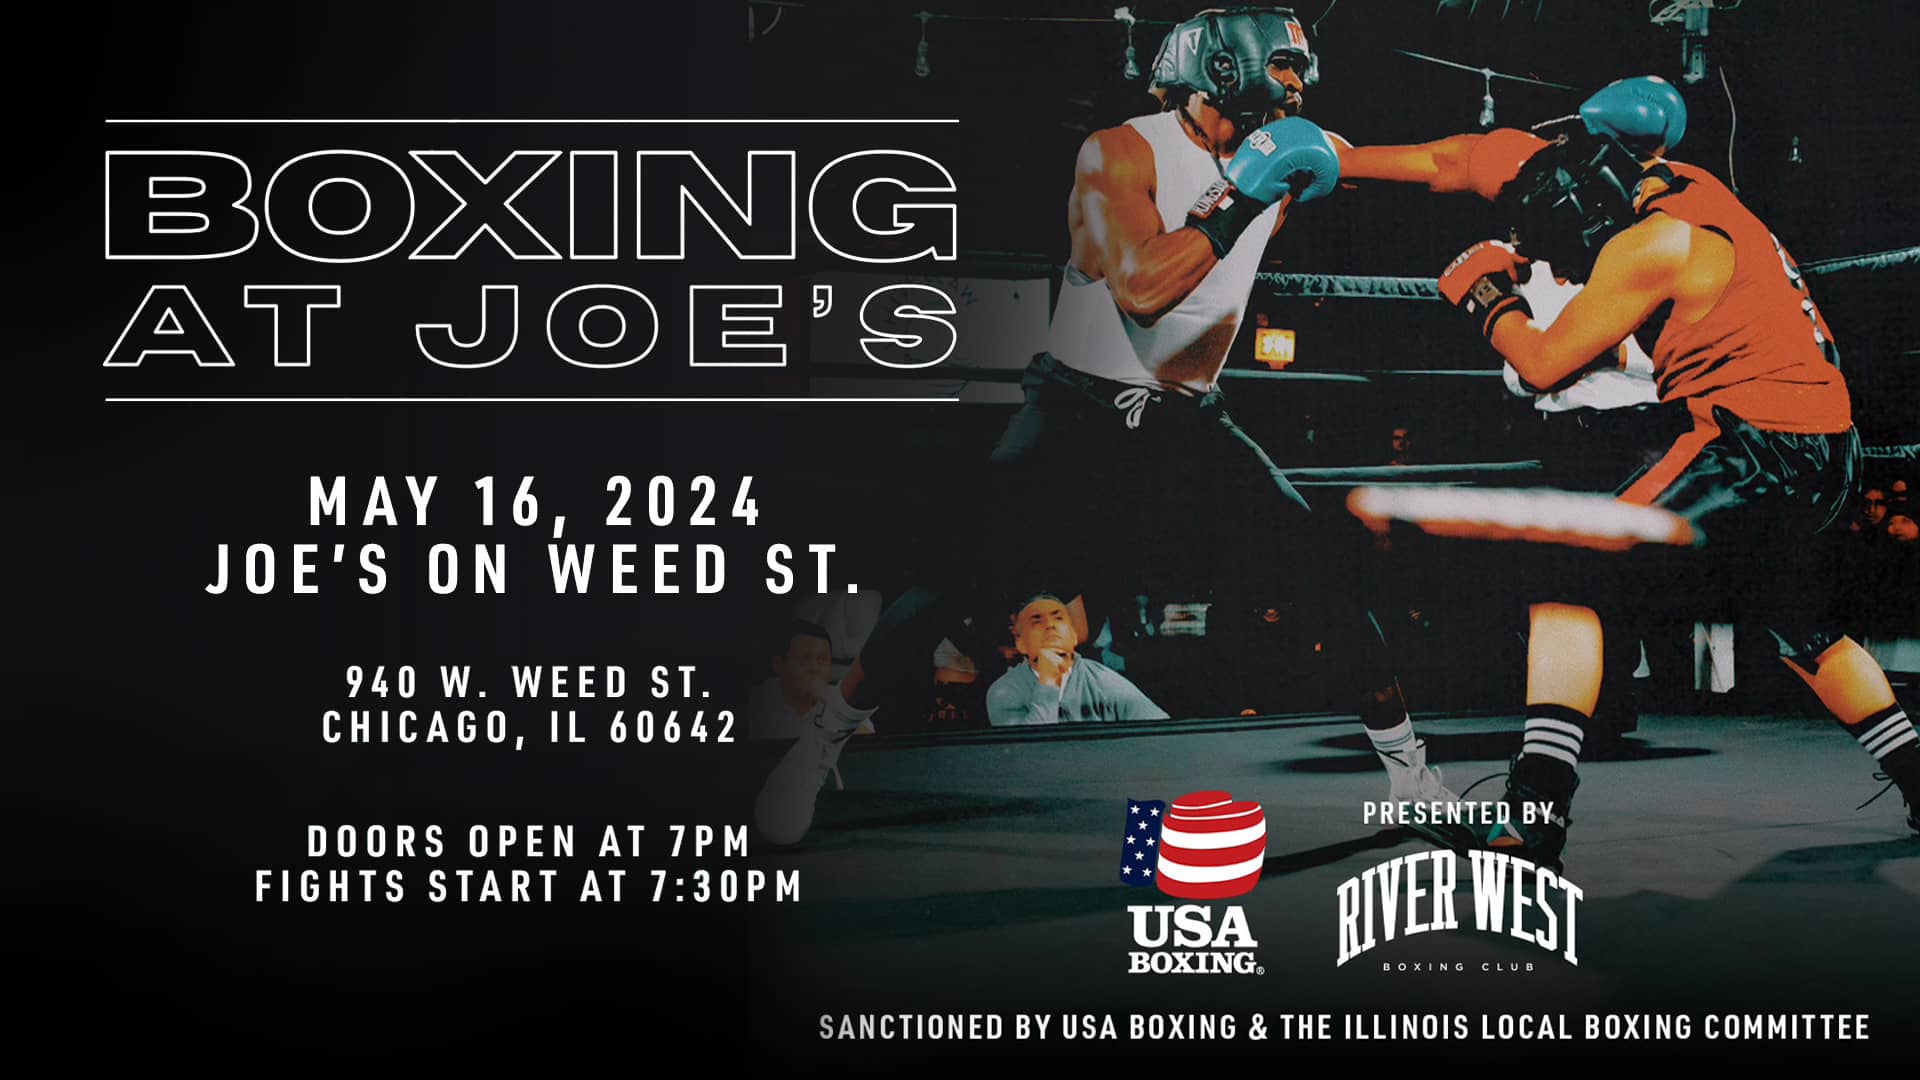 Poster for USA Boxing, presented by River West Boxing Club, on on May 16, 2024 at Joe's on Weed St.